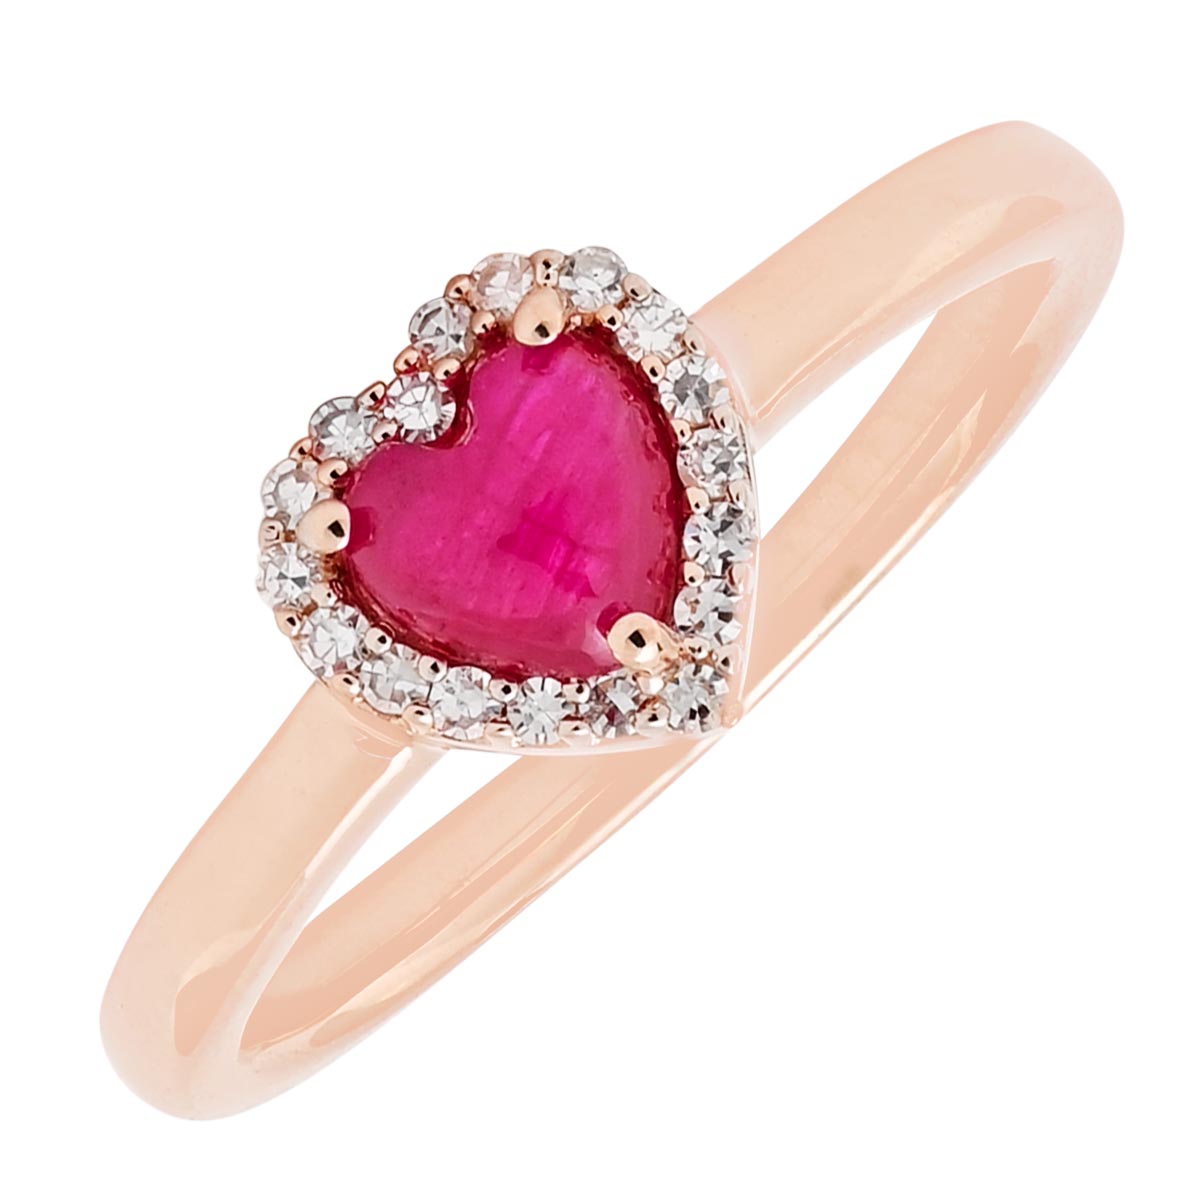 Greenland Ruby Heart Ring in 10kt Rose Gold with Diamonds (1/10ct tw)